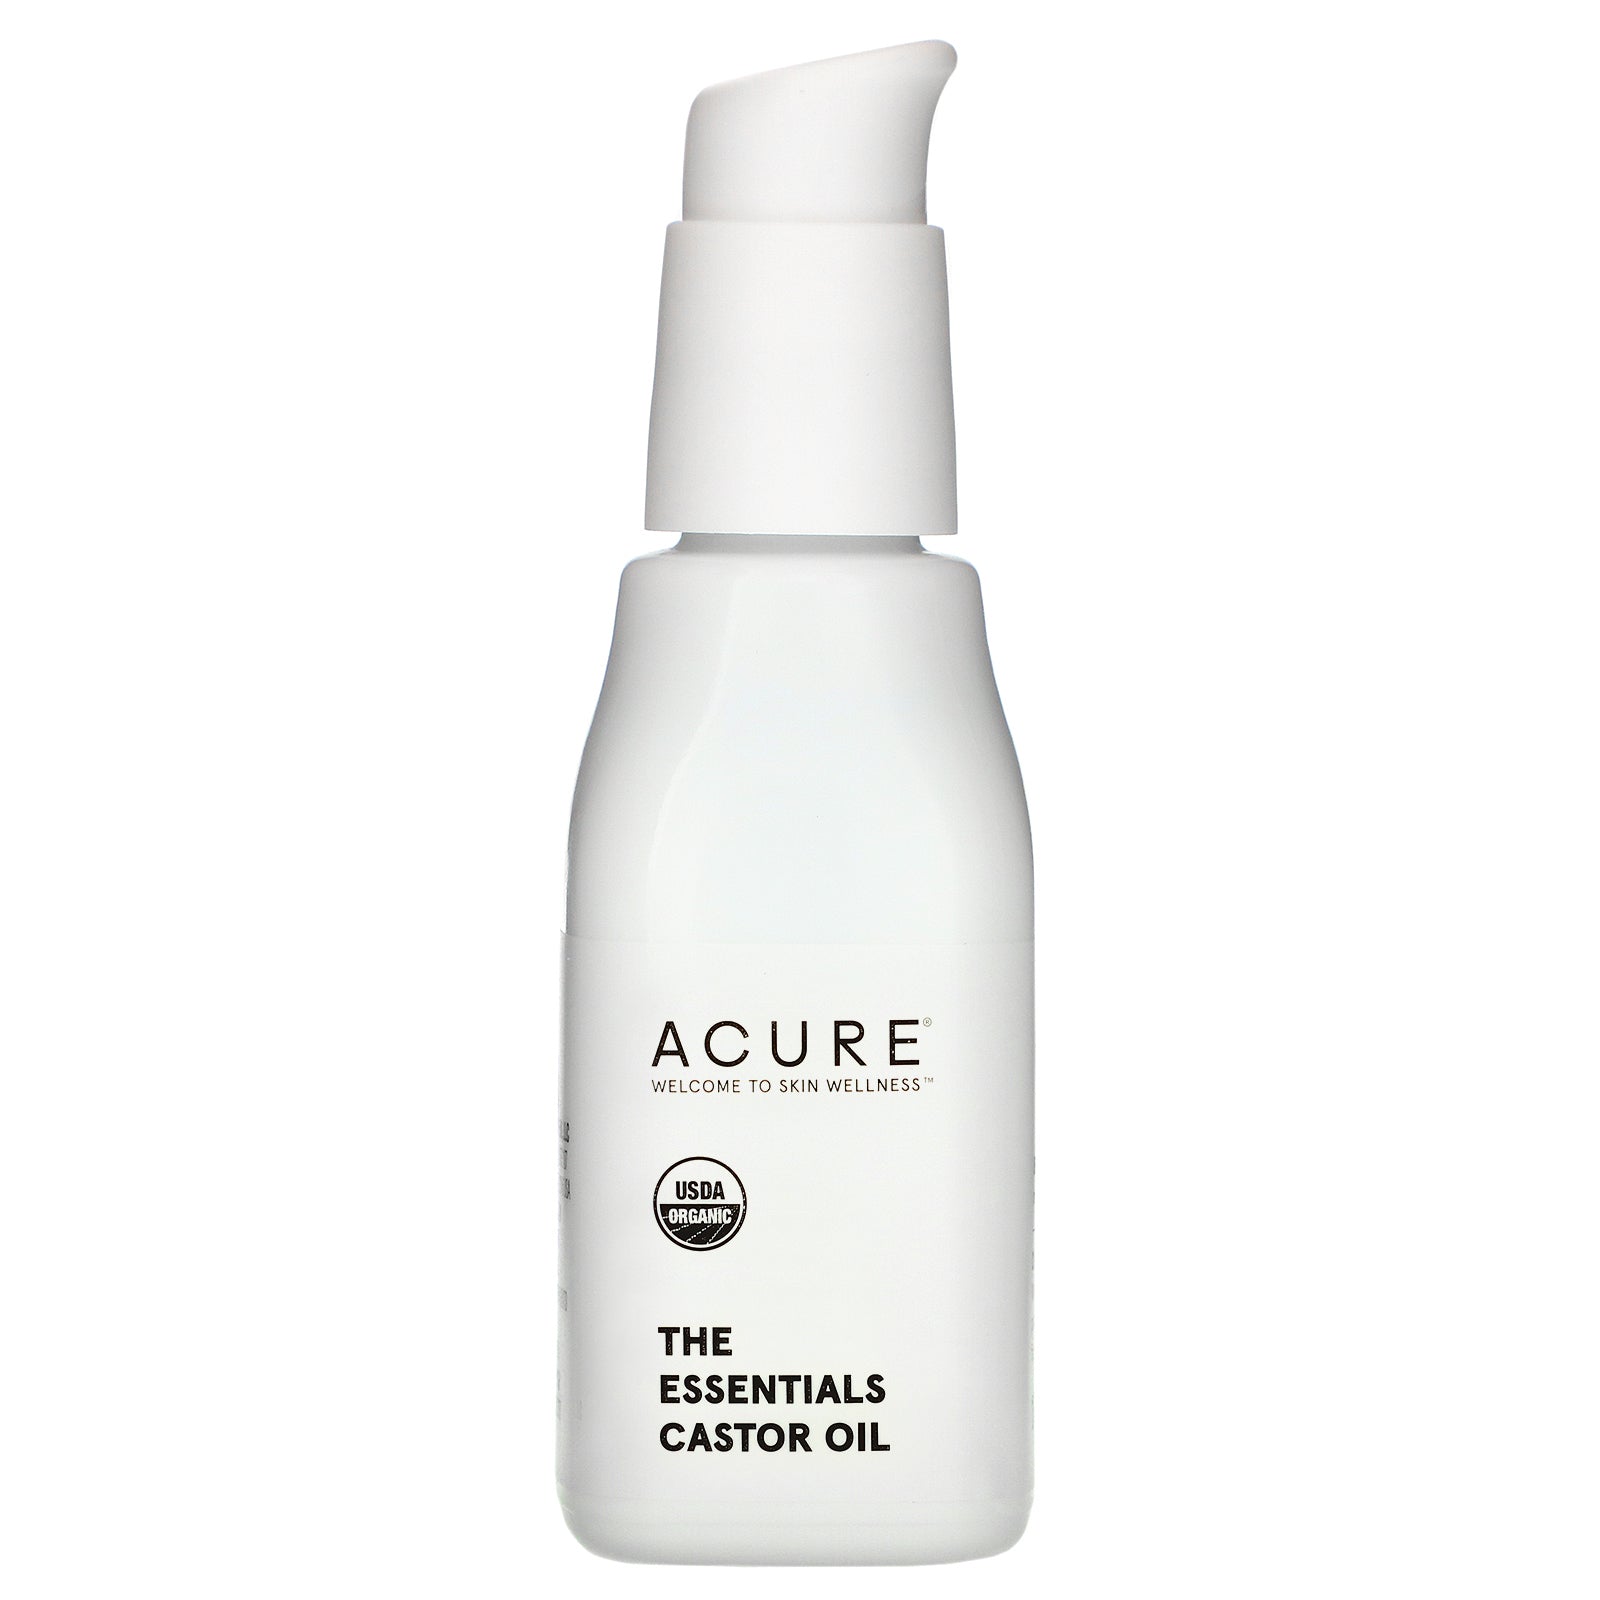 Acure, The Essentials Castor Oil, 1 fl oz (30 ml)